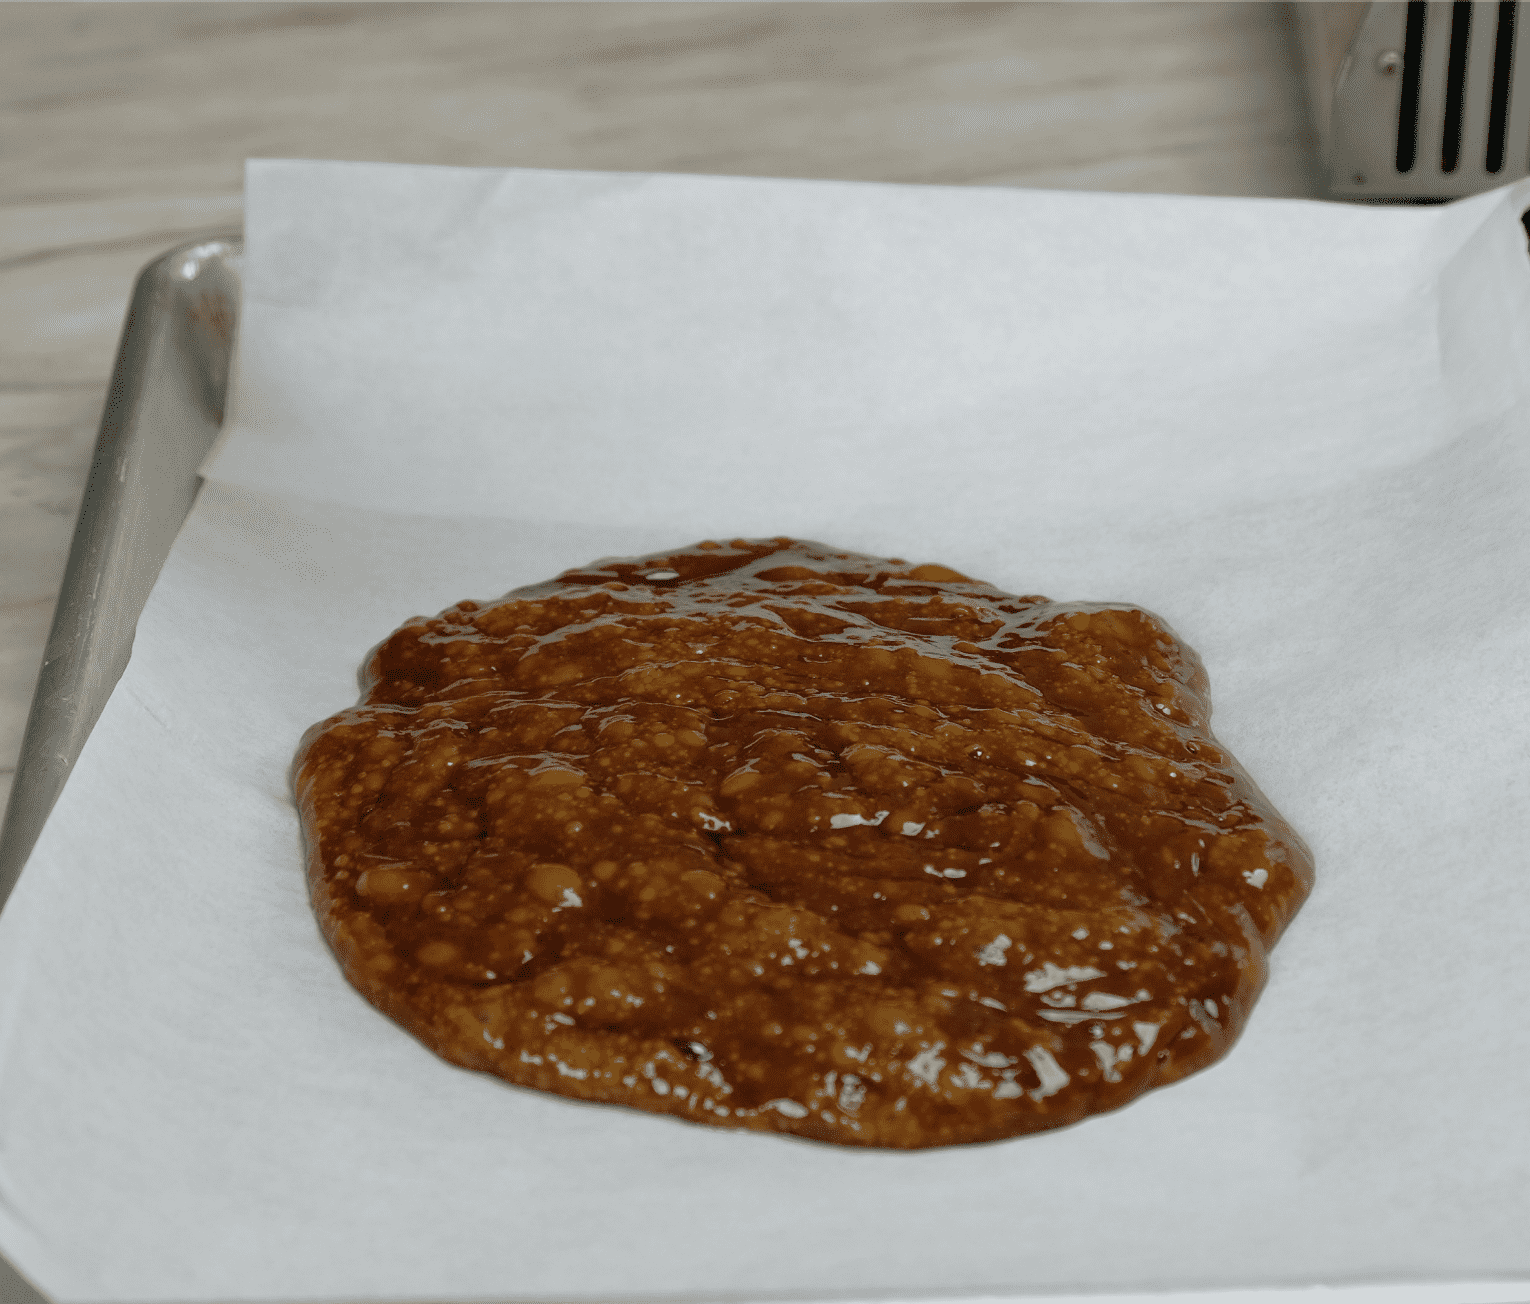 COOKED TOFFEE ON BAKING SHEET